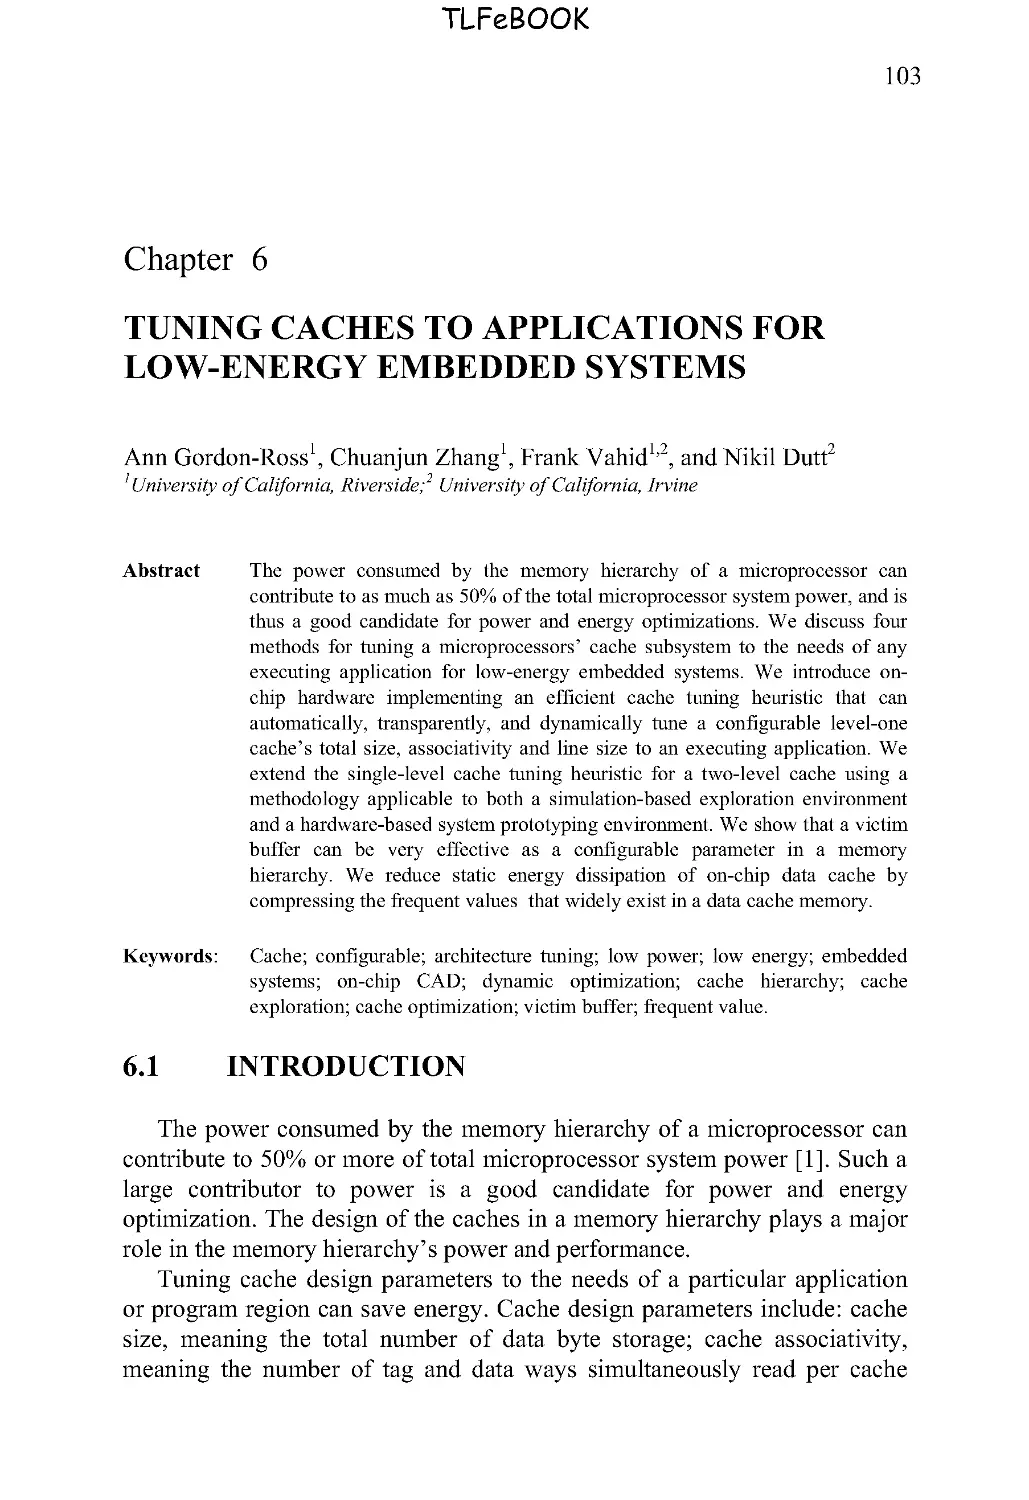 6. TUNING CACHES TO APPLICATIONS FOR LOW-ENERGY EMBEDDED SYSTEMS